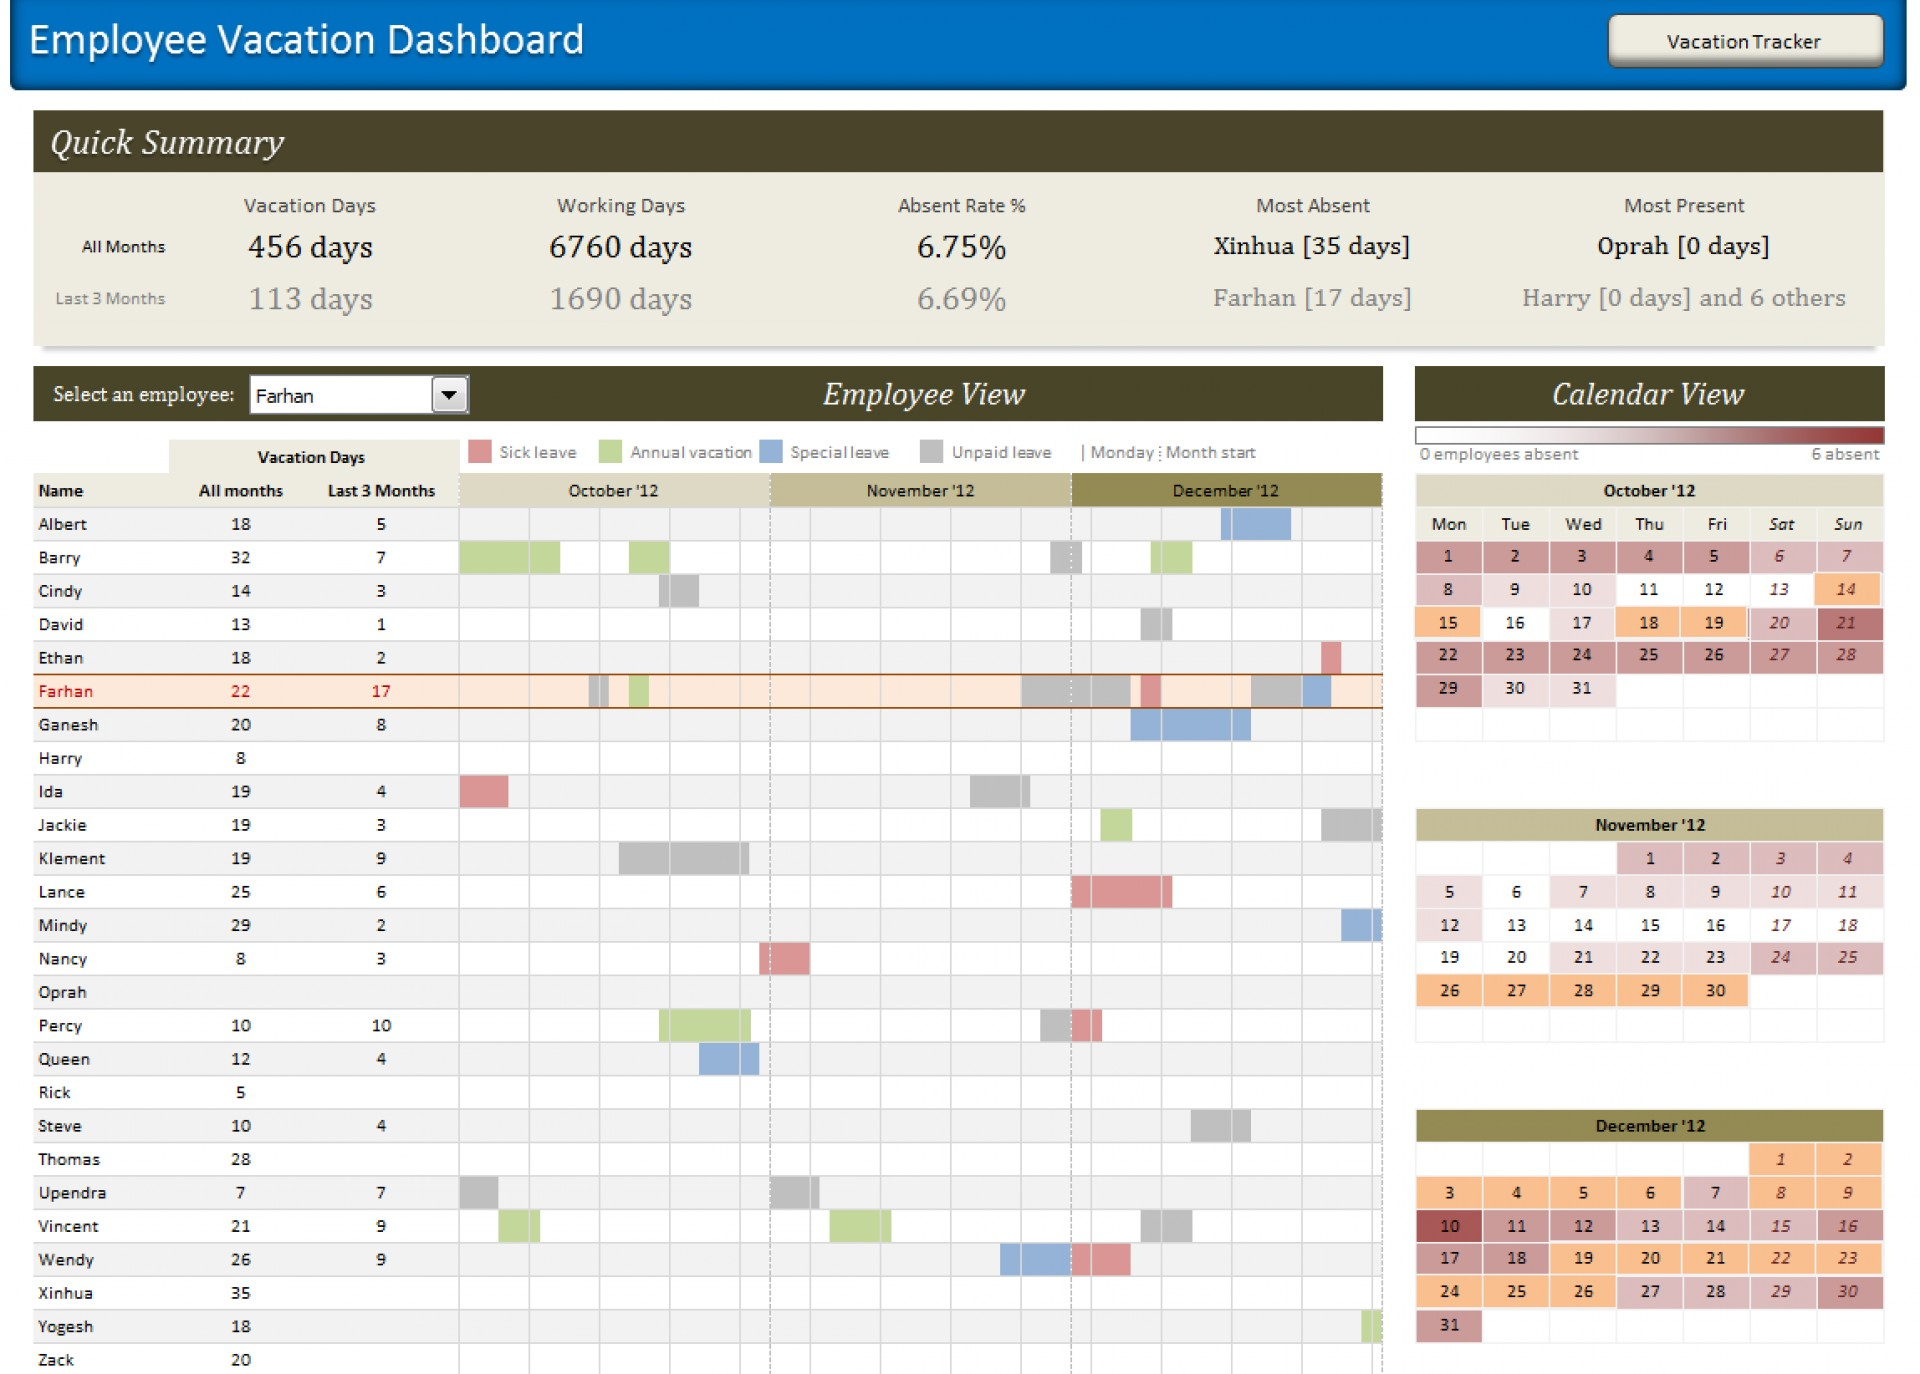 Pto Tracking Spreadsheet Excel Throughout 002 Employee Vacation Dashboard Full View Excel Pto Tracker Template